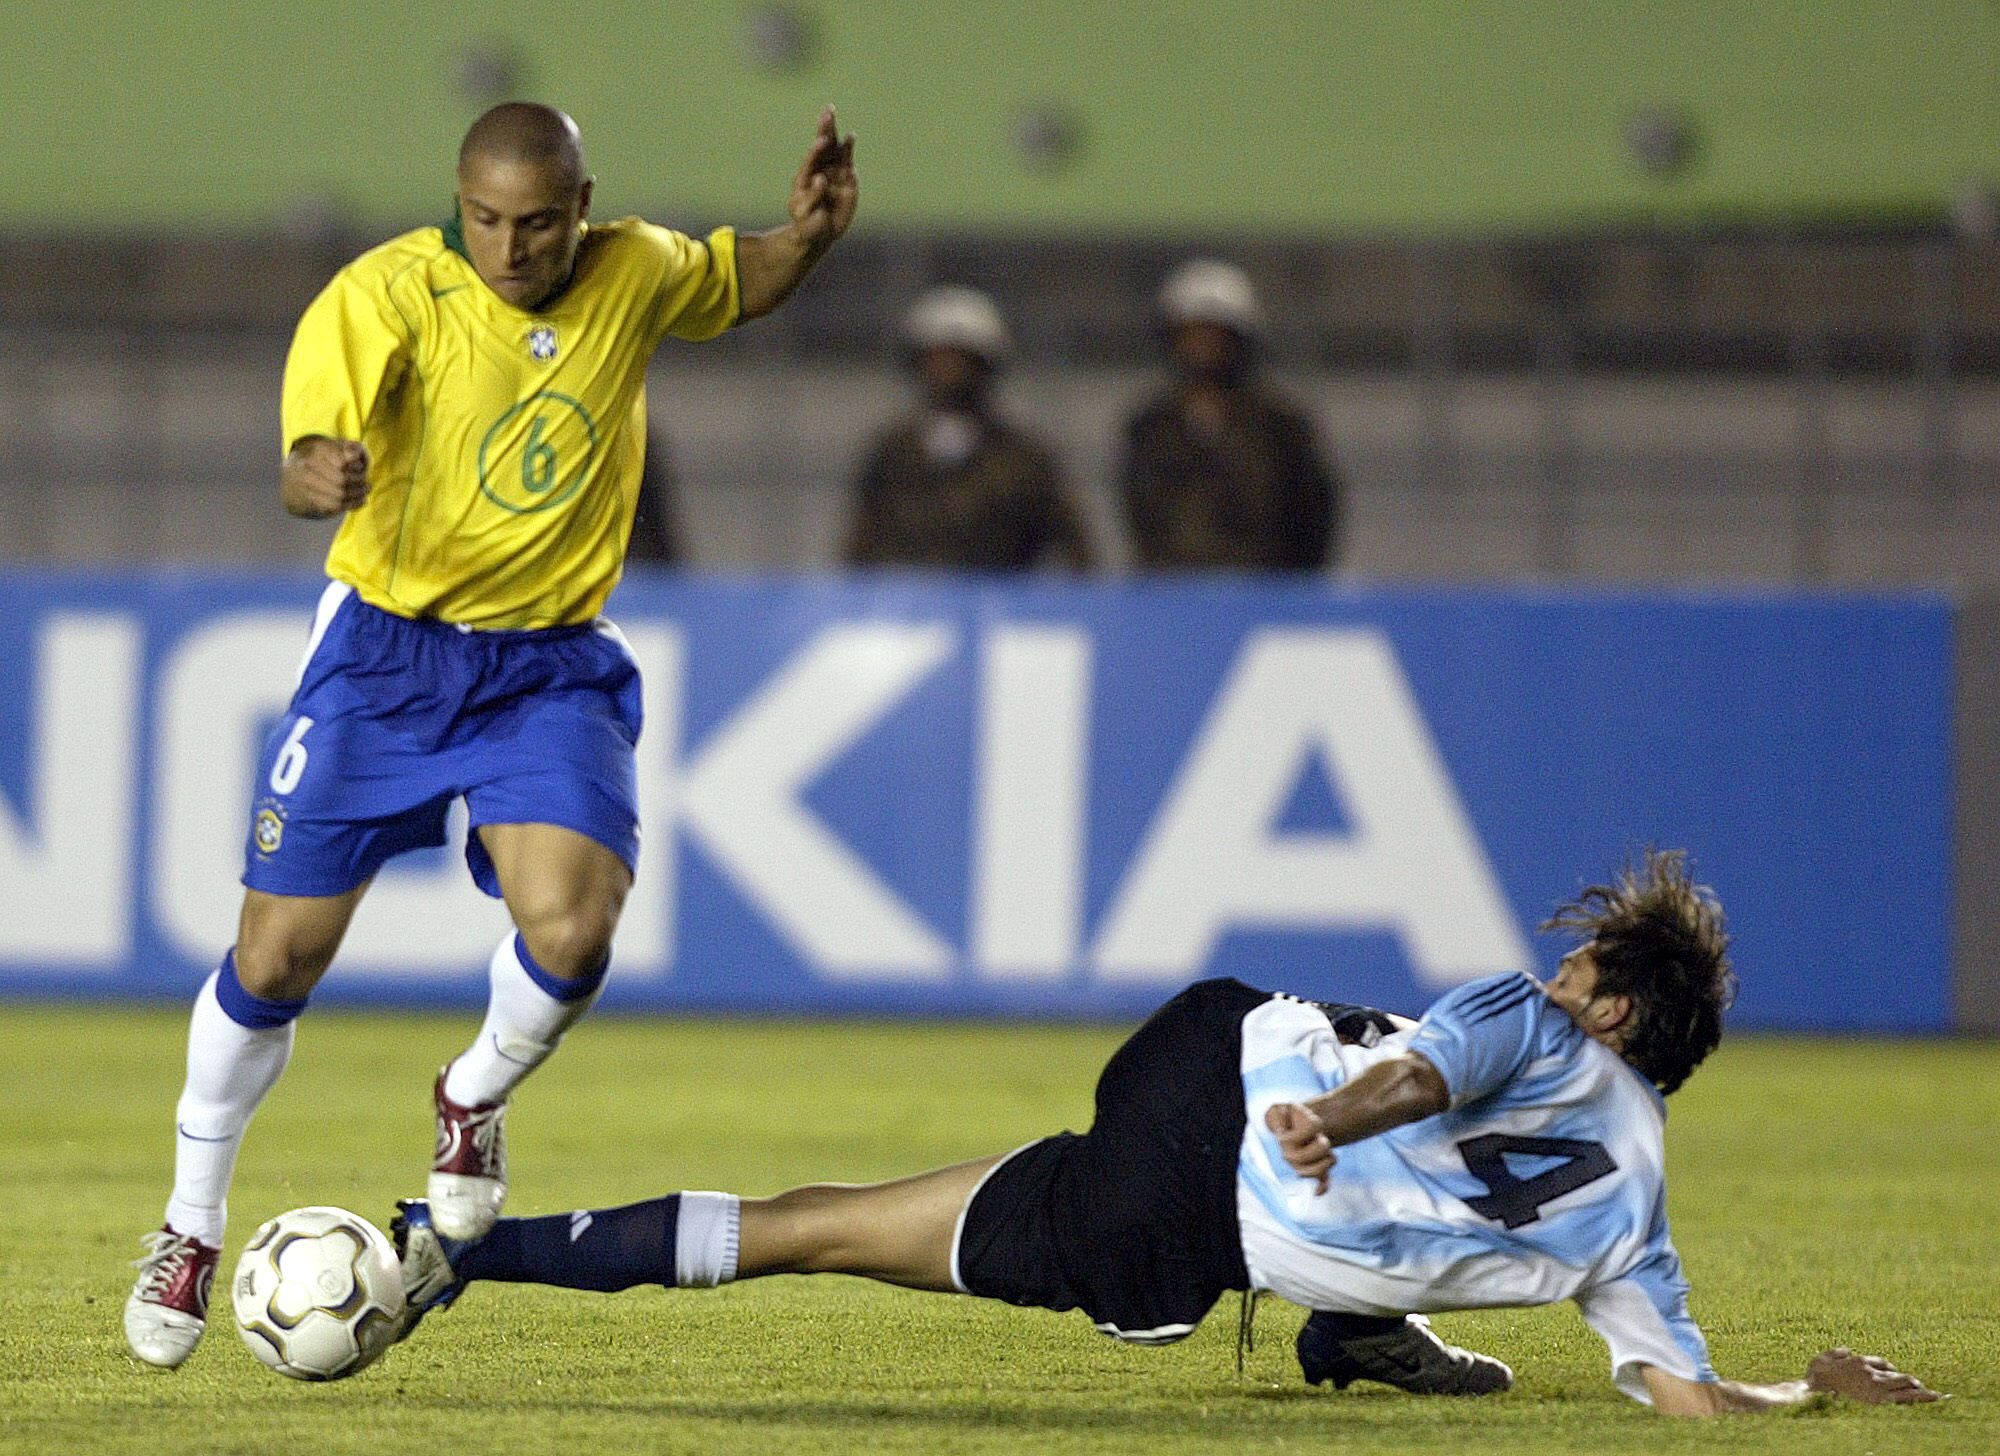 Brazilian team soccer player Roberto Carlos (L) fights for the ball against Fernando Quiroga (R) from Argentina during the qualifying round match for the Germany 2006 World Cup at Minerao Stadium in Belo Horizonte, Brazil, Wednesday 02 June 2004. Brazil won 3-1.  EPA/CAETANO BARREIRA